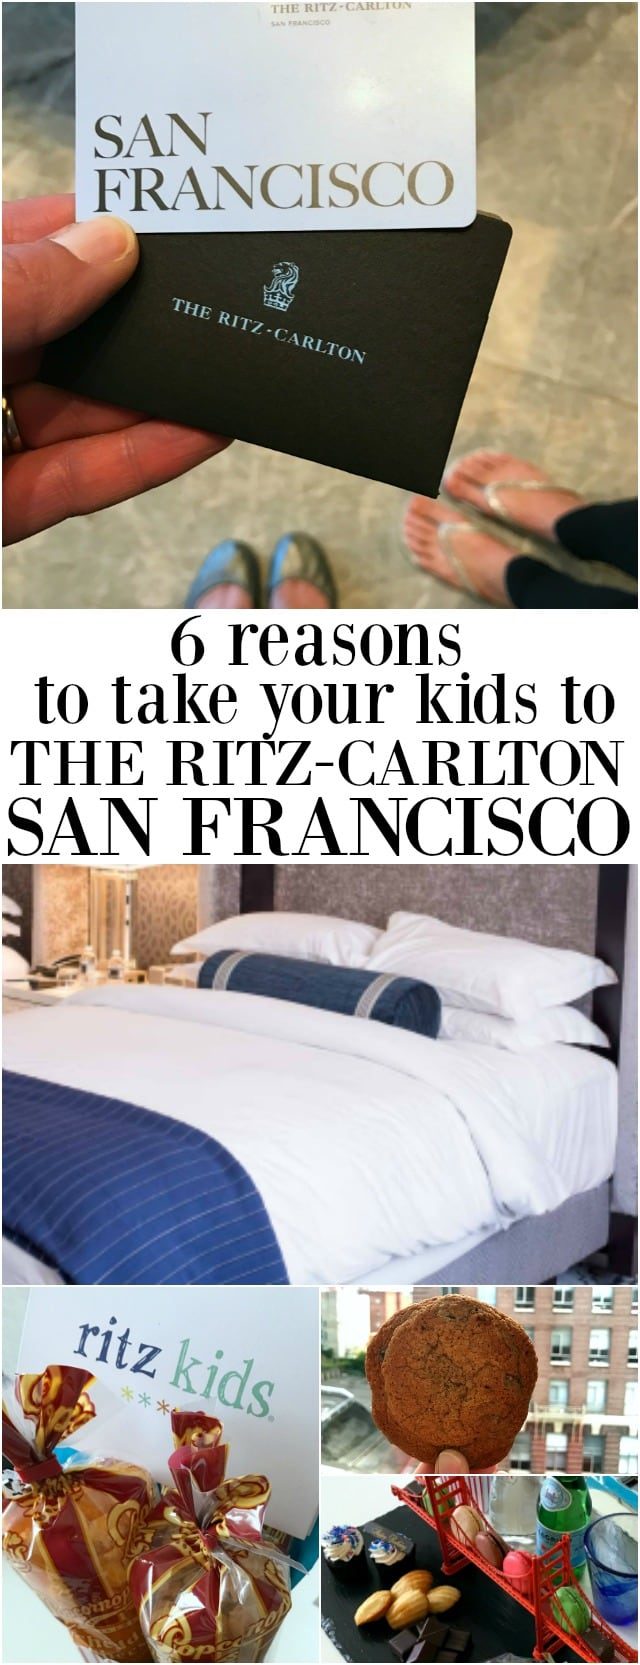 6 Reasons to take your kids to The Ritz Carlton in San Francisco for a fun weekend vacation collage photo